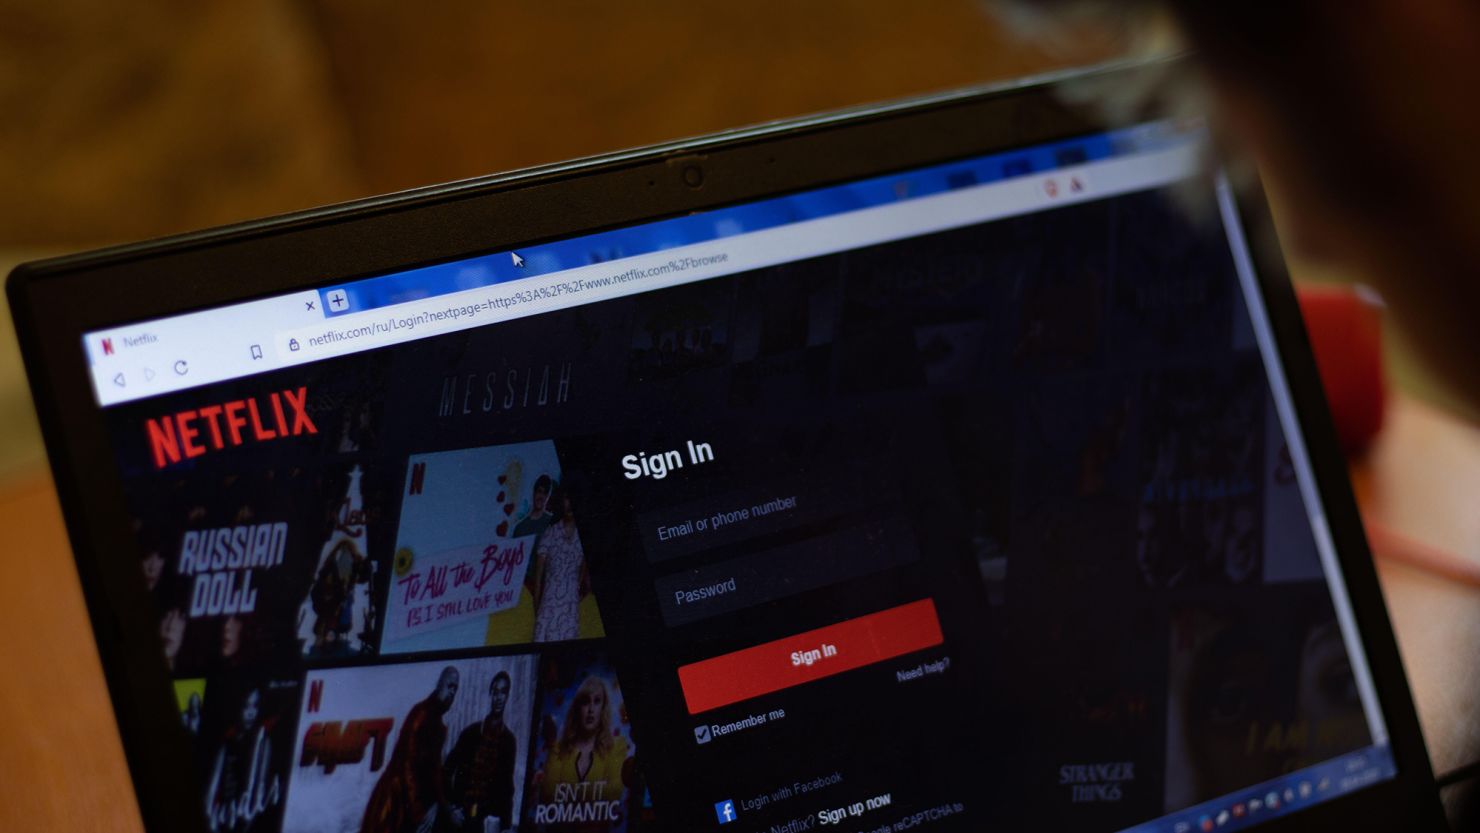 Netflix website's sign-in page is seen on a laptop screen in New York, in April 2020.